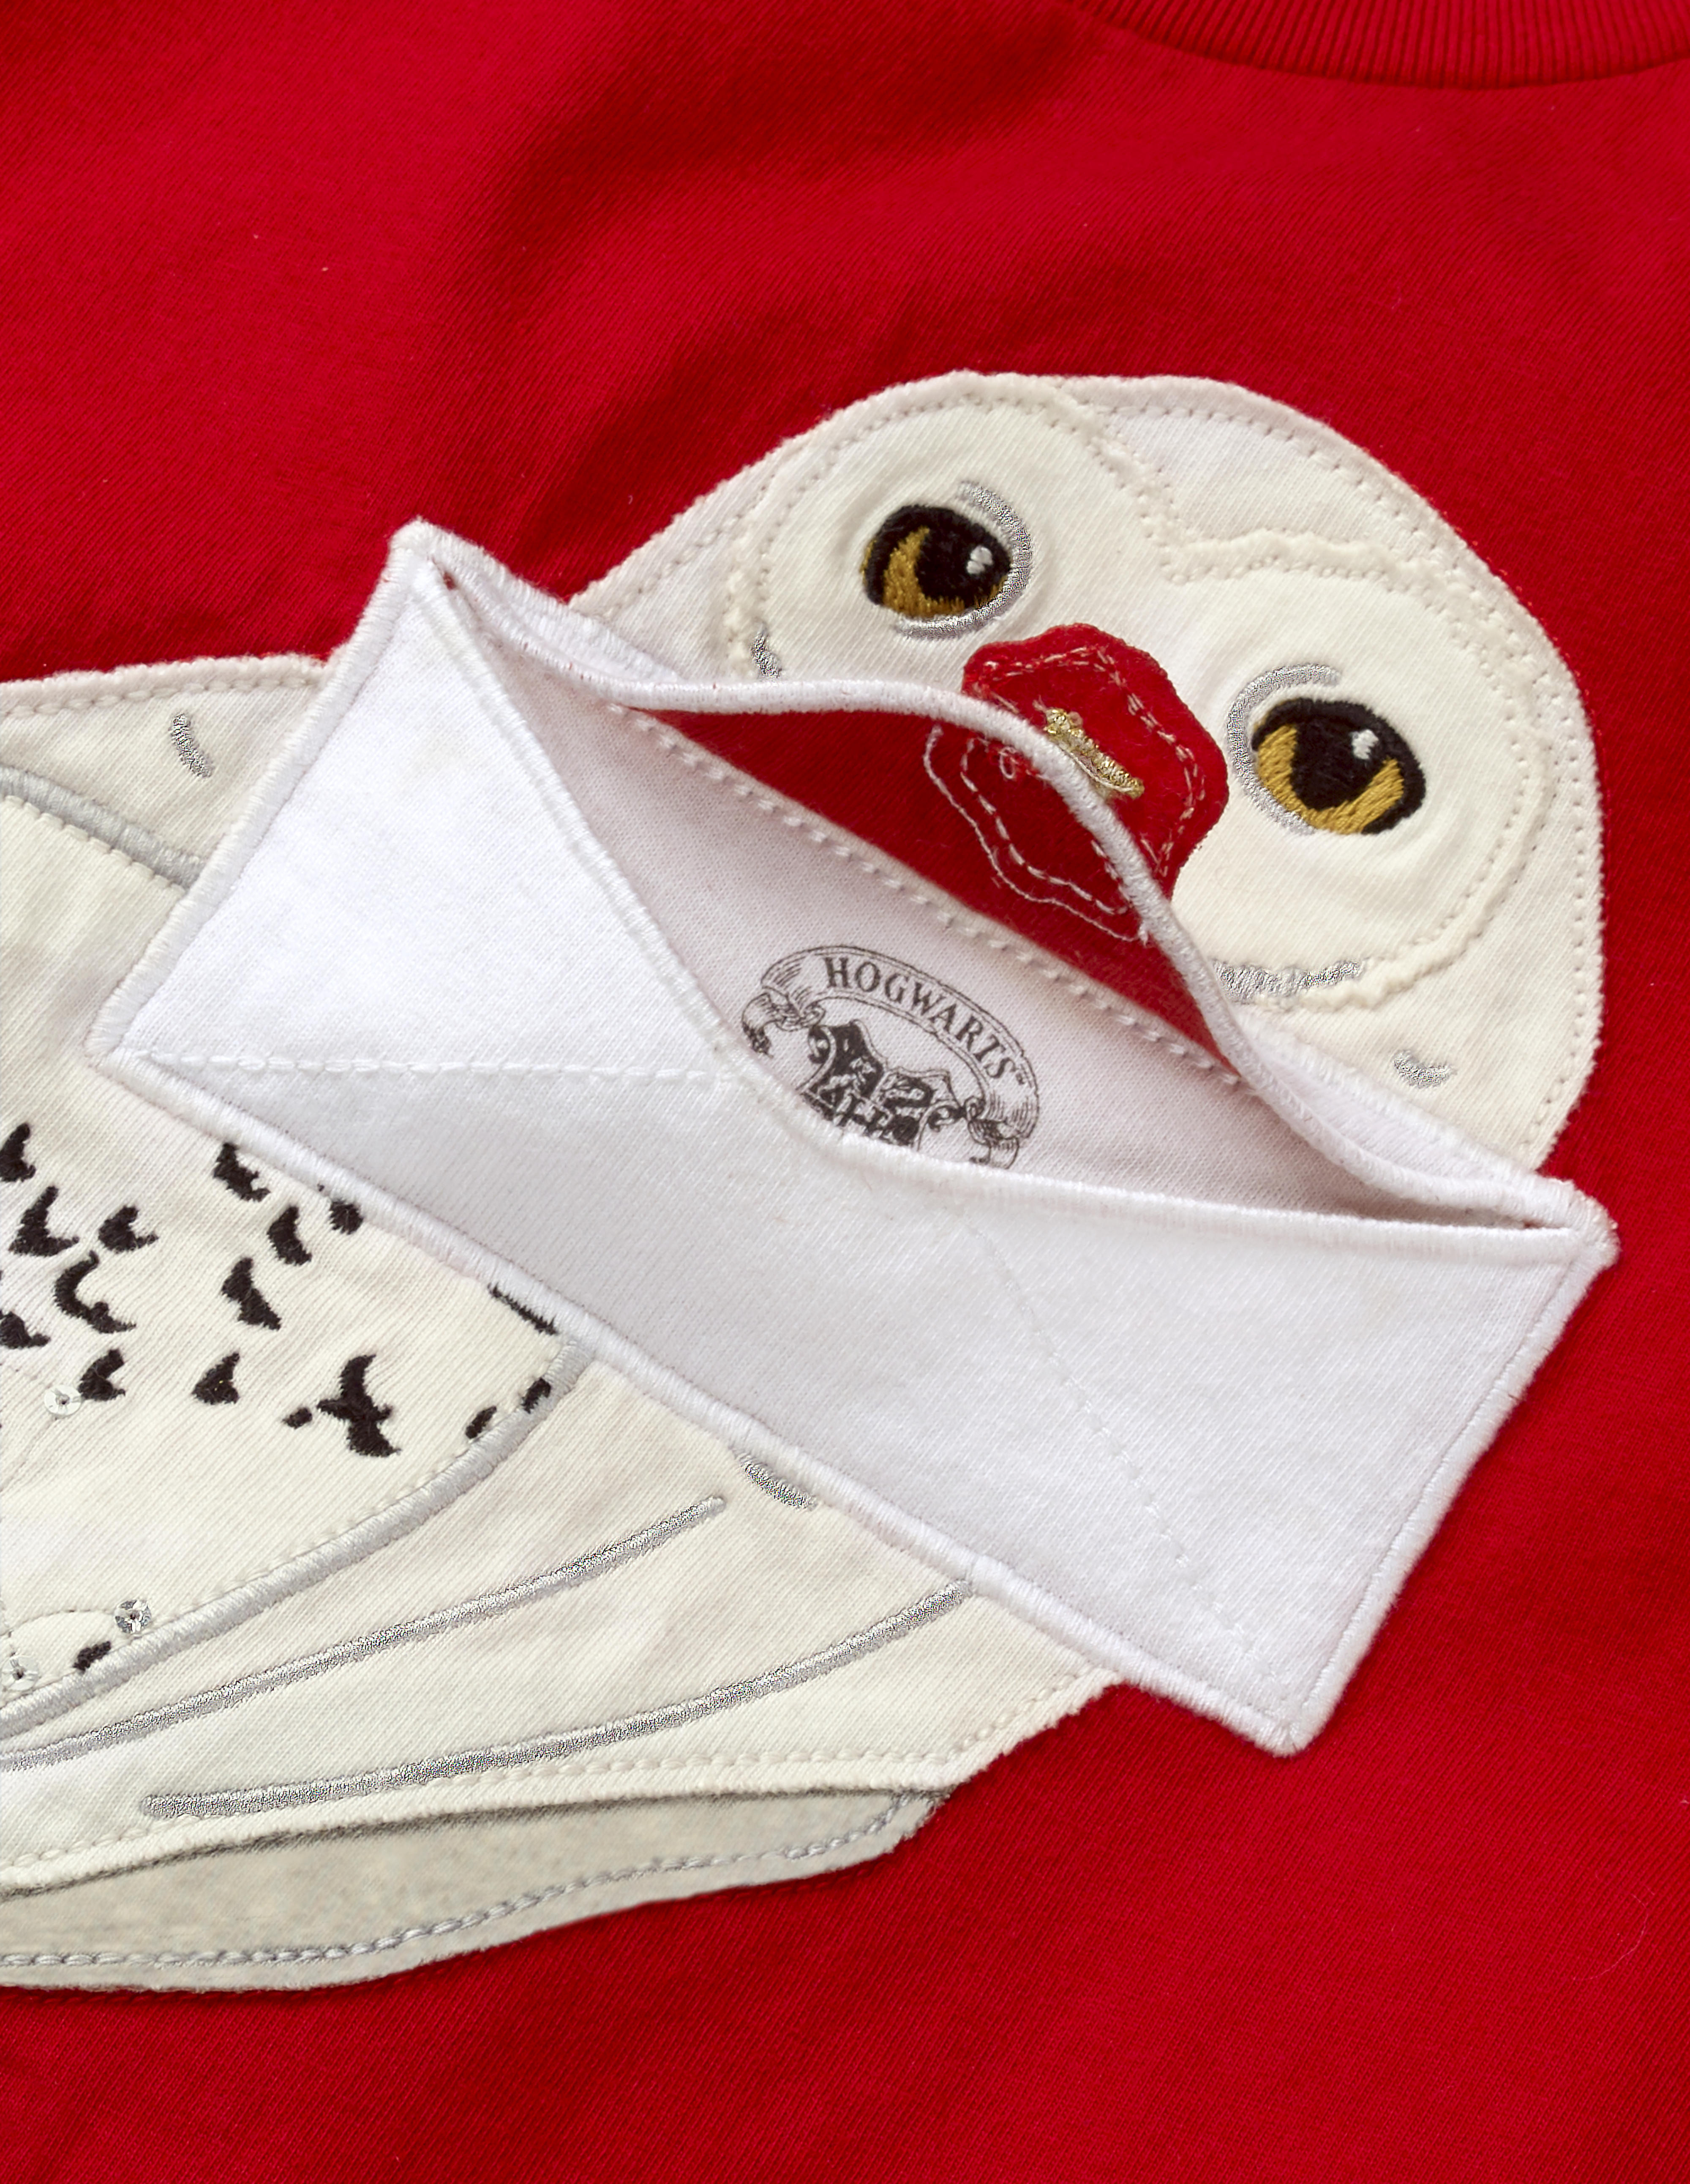 This close-up of the Mini Boden Hedwig Appliqué T-shirt in red shows how the flap of the envelope containing the Hogwarts acceptance letter lifts up to reveal the top of the Hogwarts seal. The shirt retails at £22.